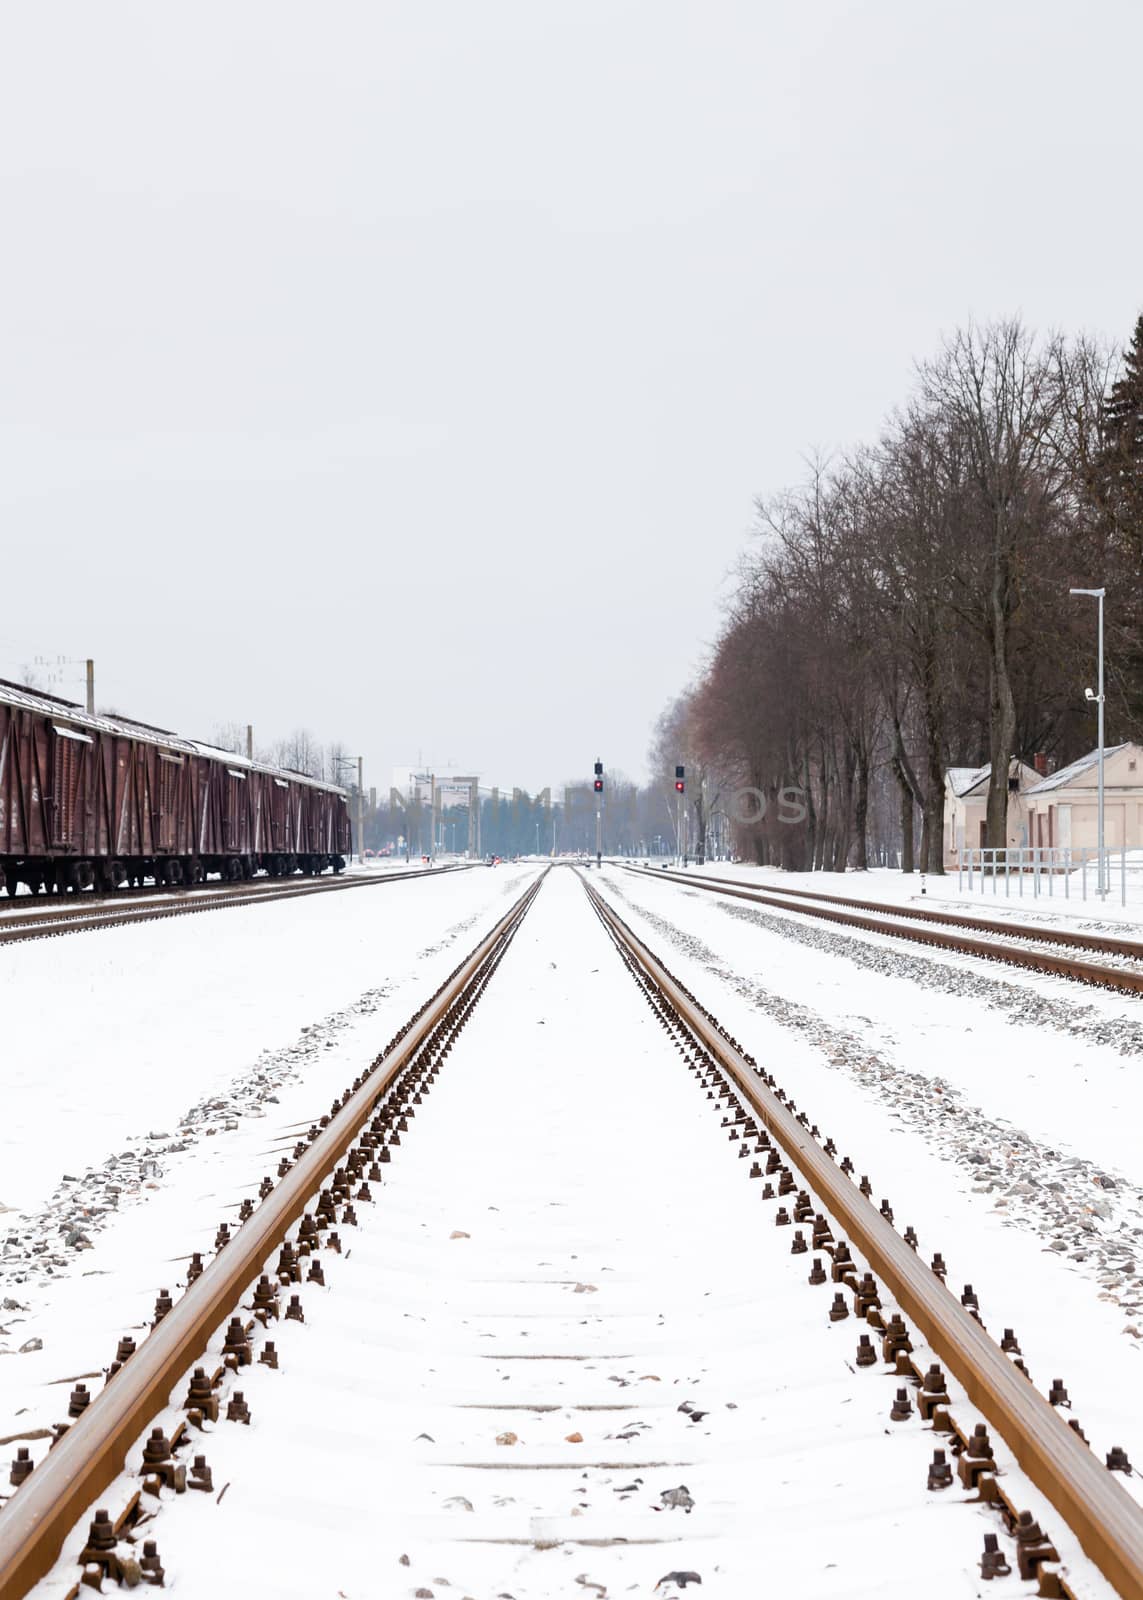 The view along a snow covered railway track in Sigulda, Latvia.